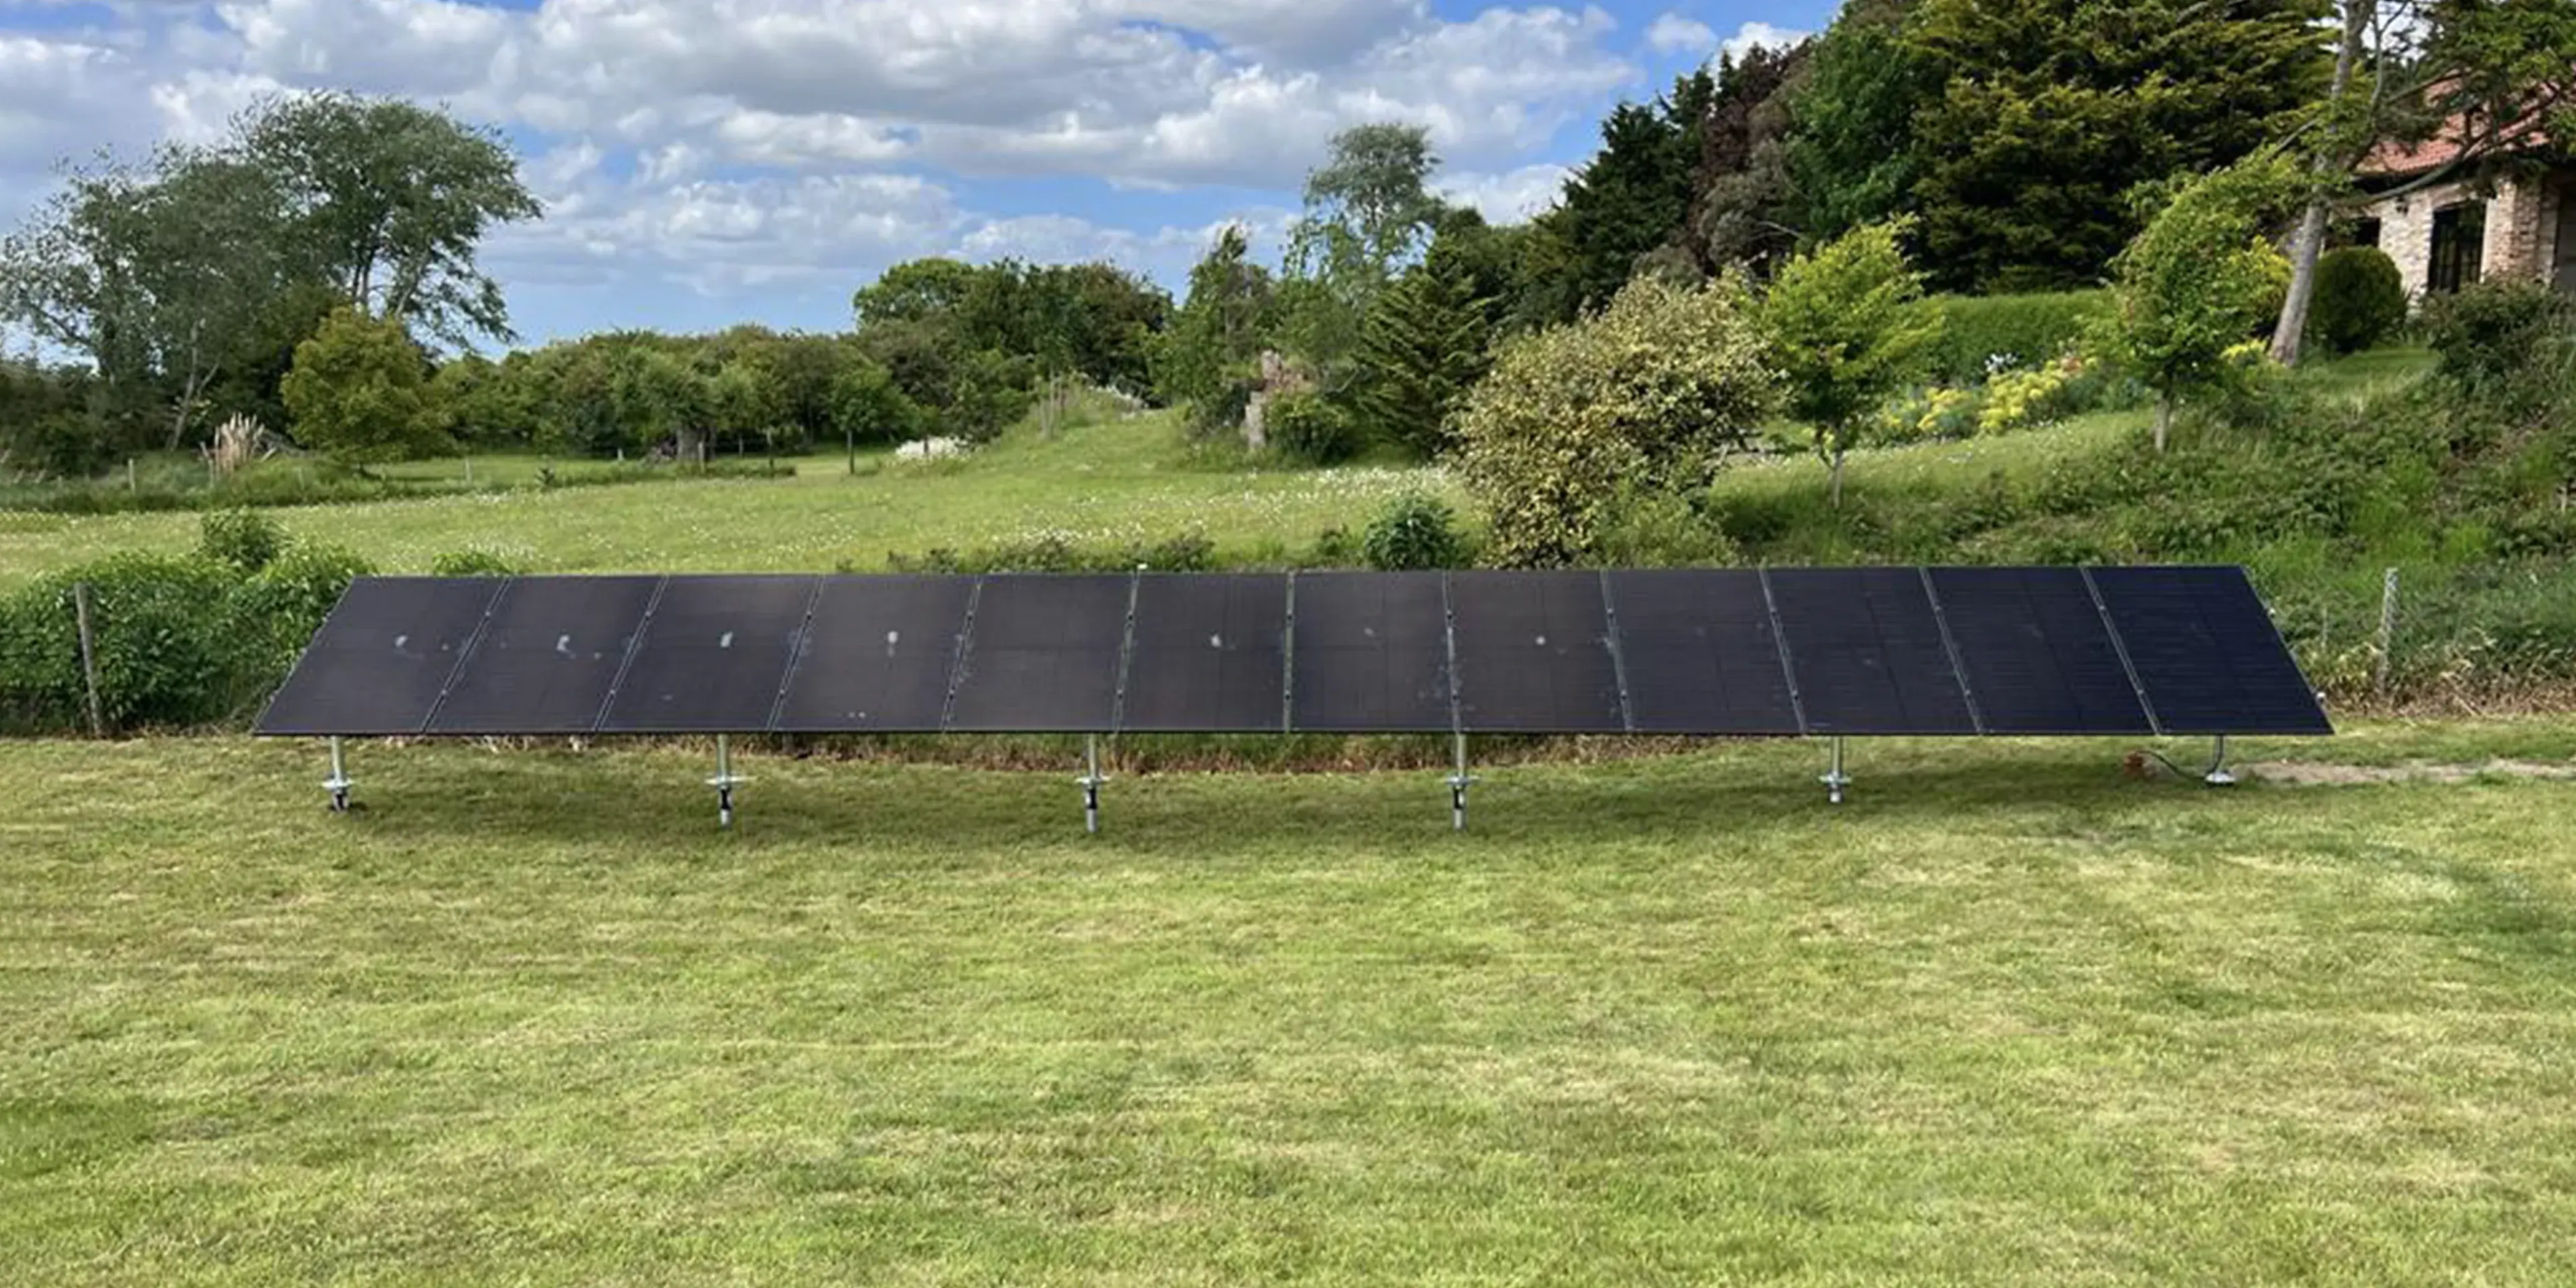 12-panel domestic solar array mounted on six ground screw foundations